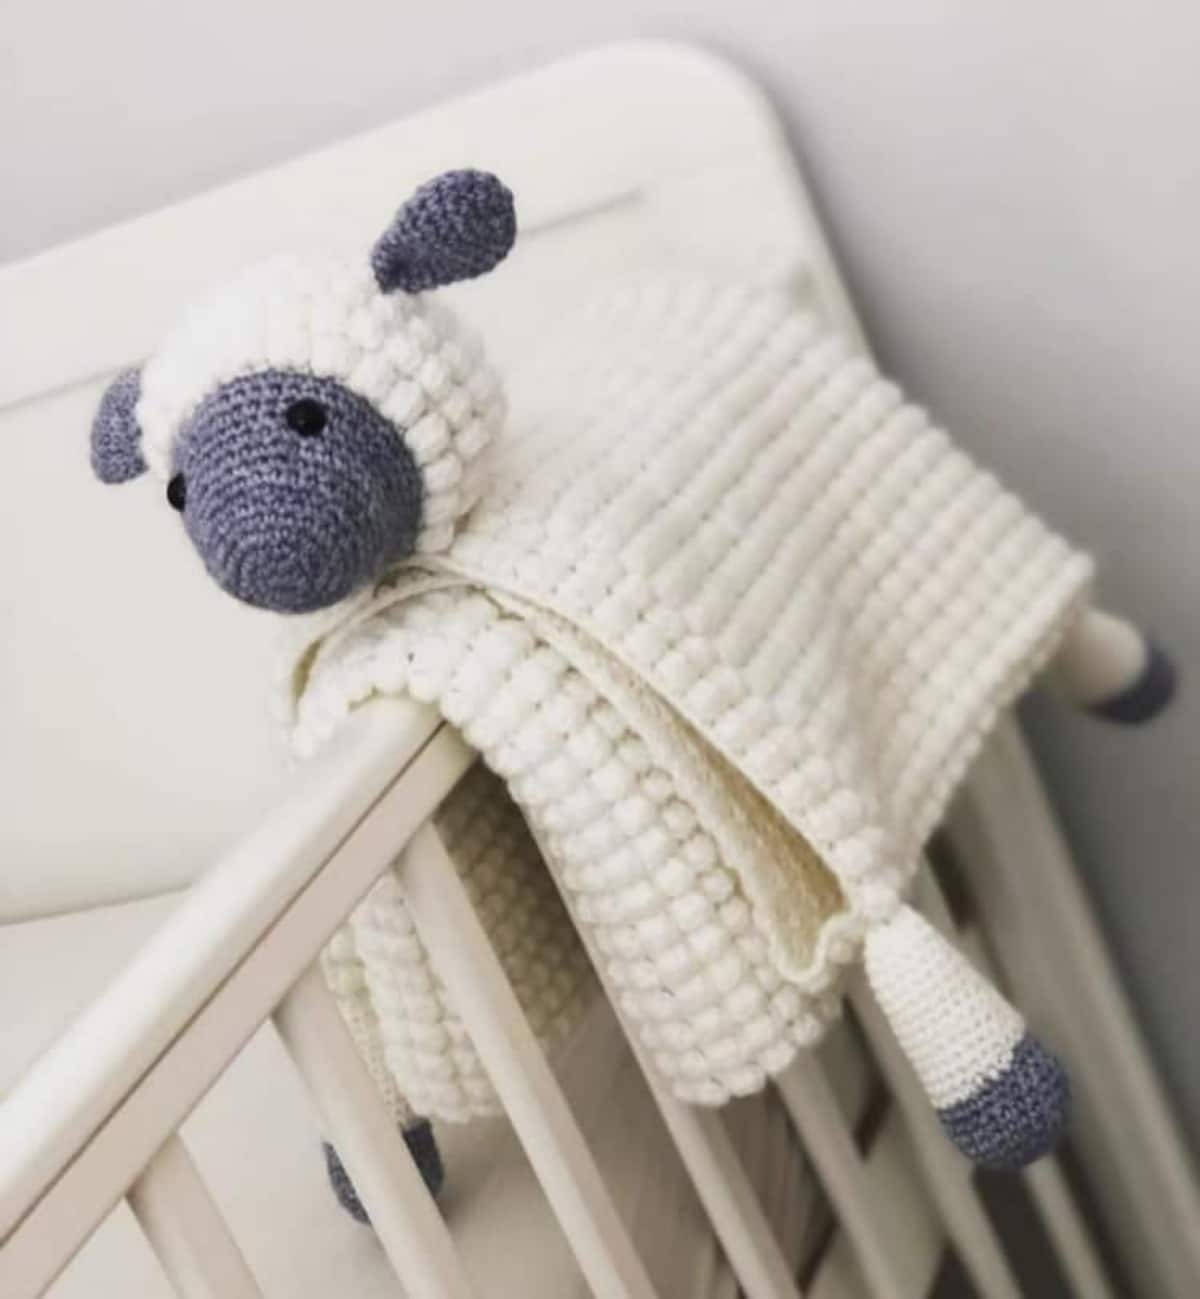 White crochet textured blanket with a stuffed gray and white lamb’s face and legs attached folded over a crib’s railings.